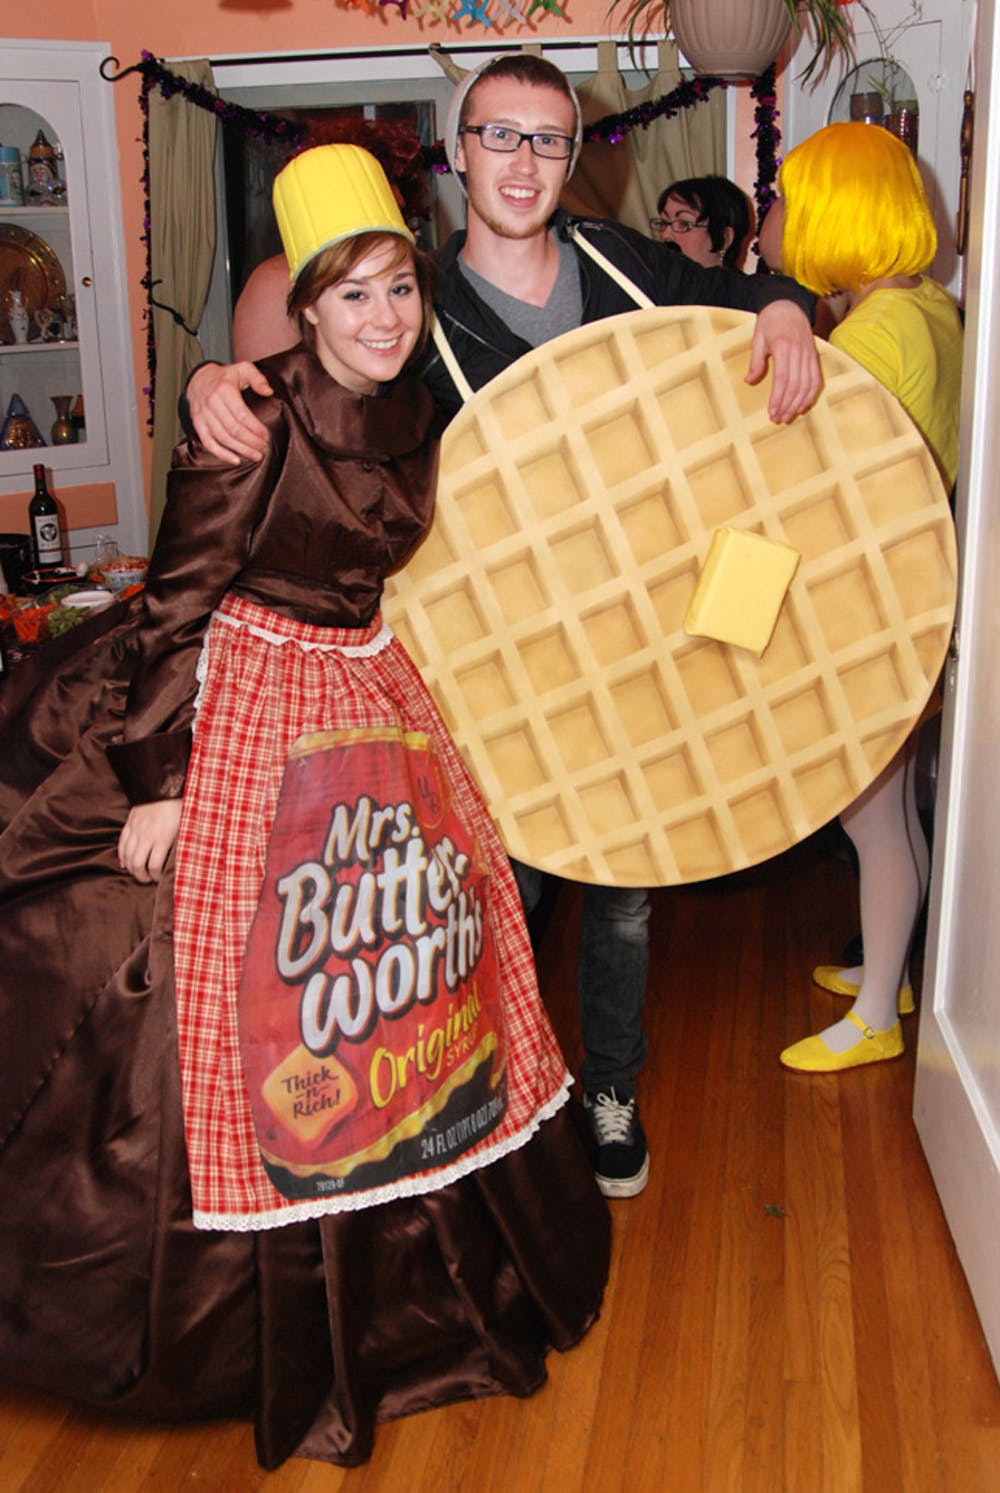 Mrs. Butterworth’s and Waffles